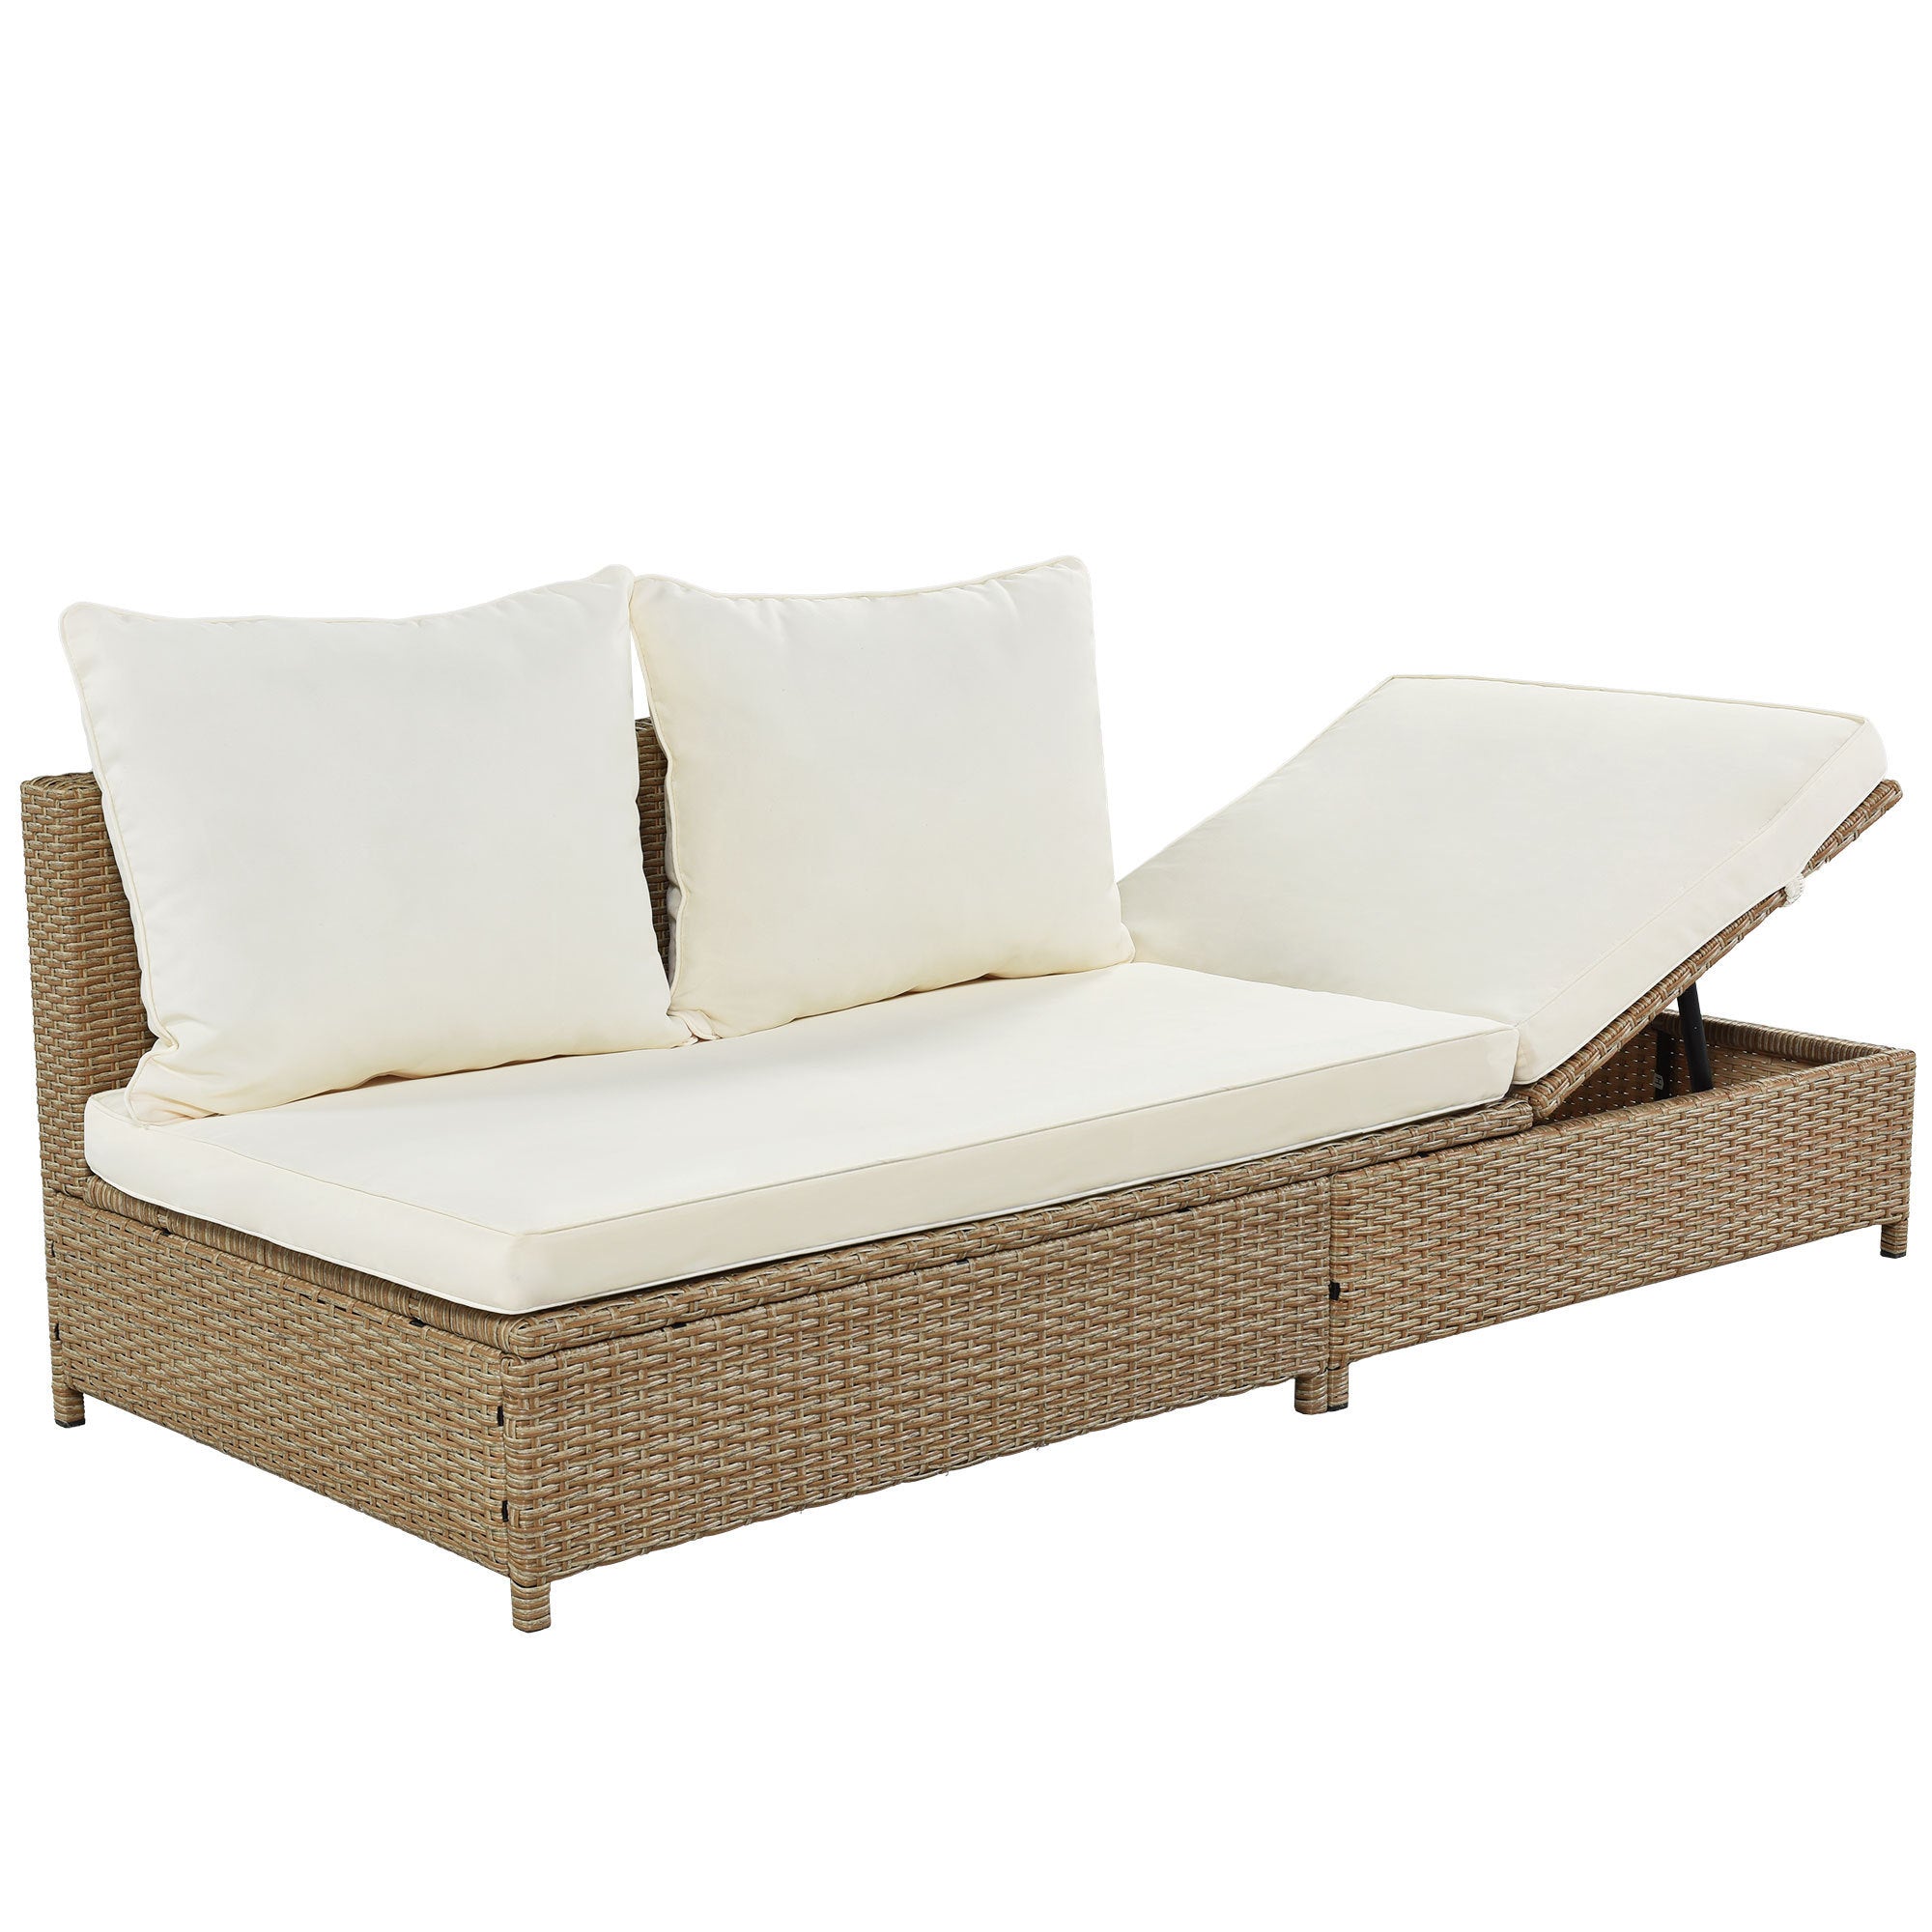 3-Piece Patio Rattan Sofa Set with Adjustable Chaise Lounge and Tempered Glass Table, Natural Brown+ Beige Cushion